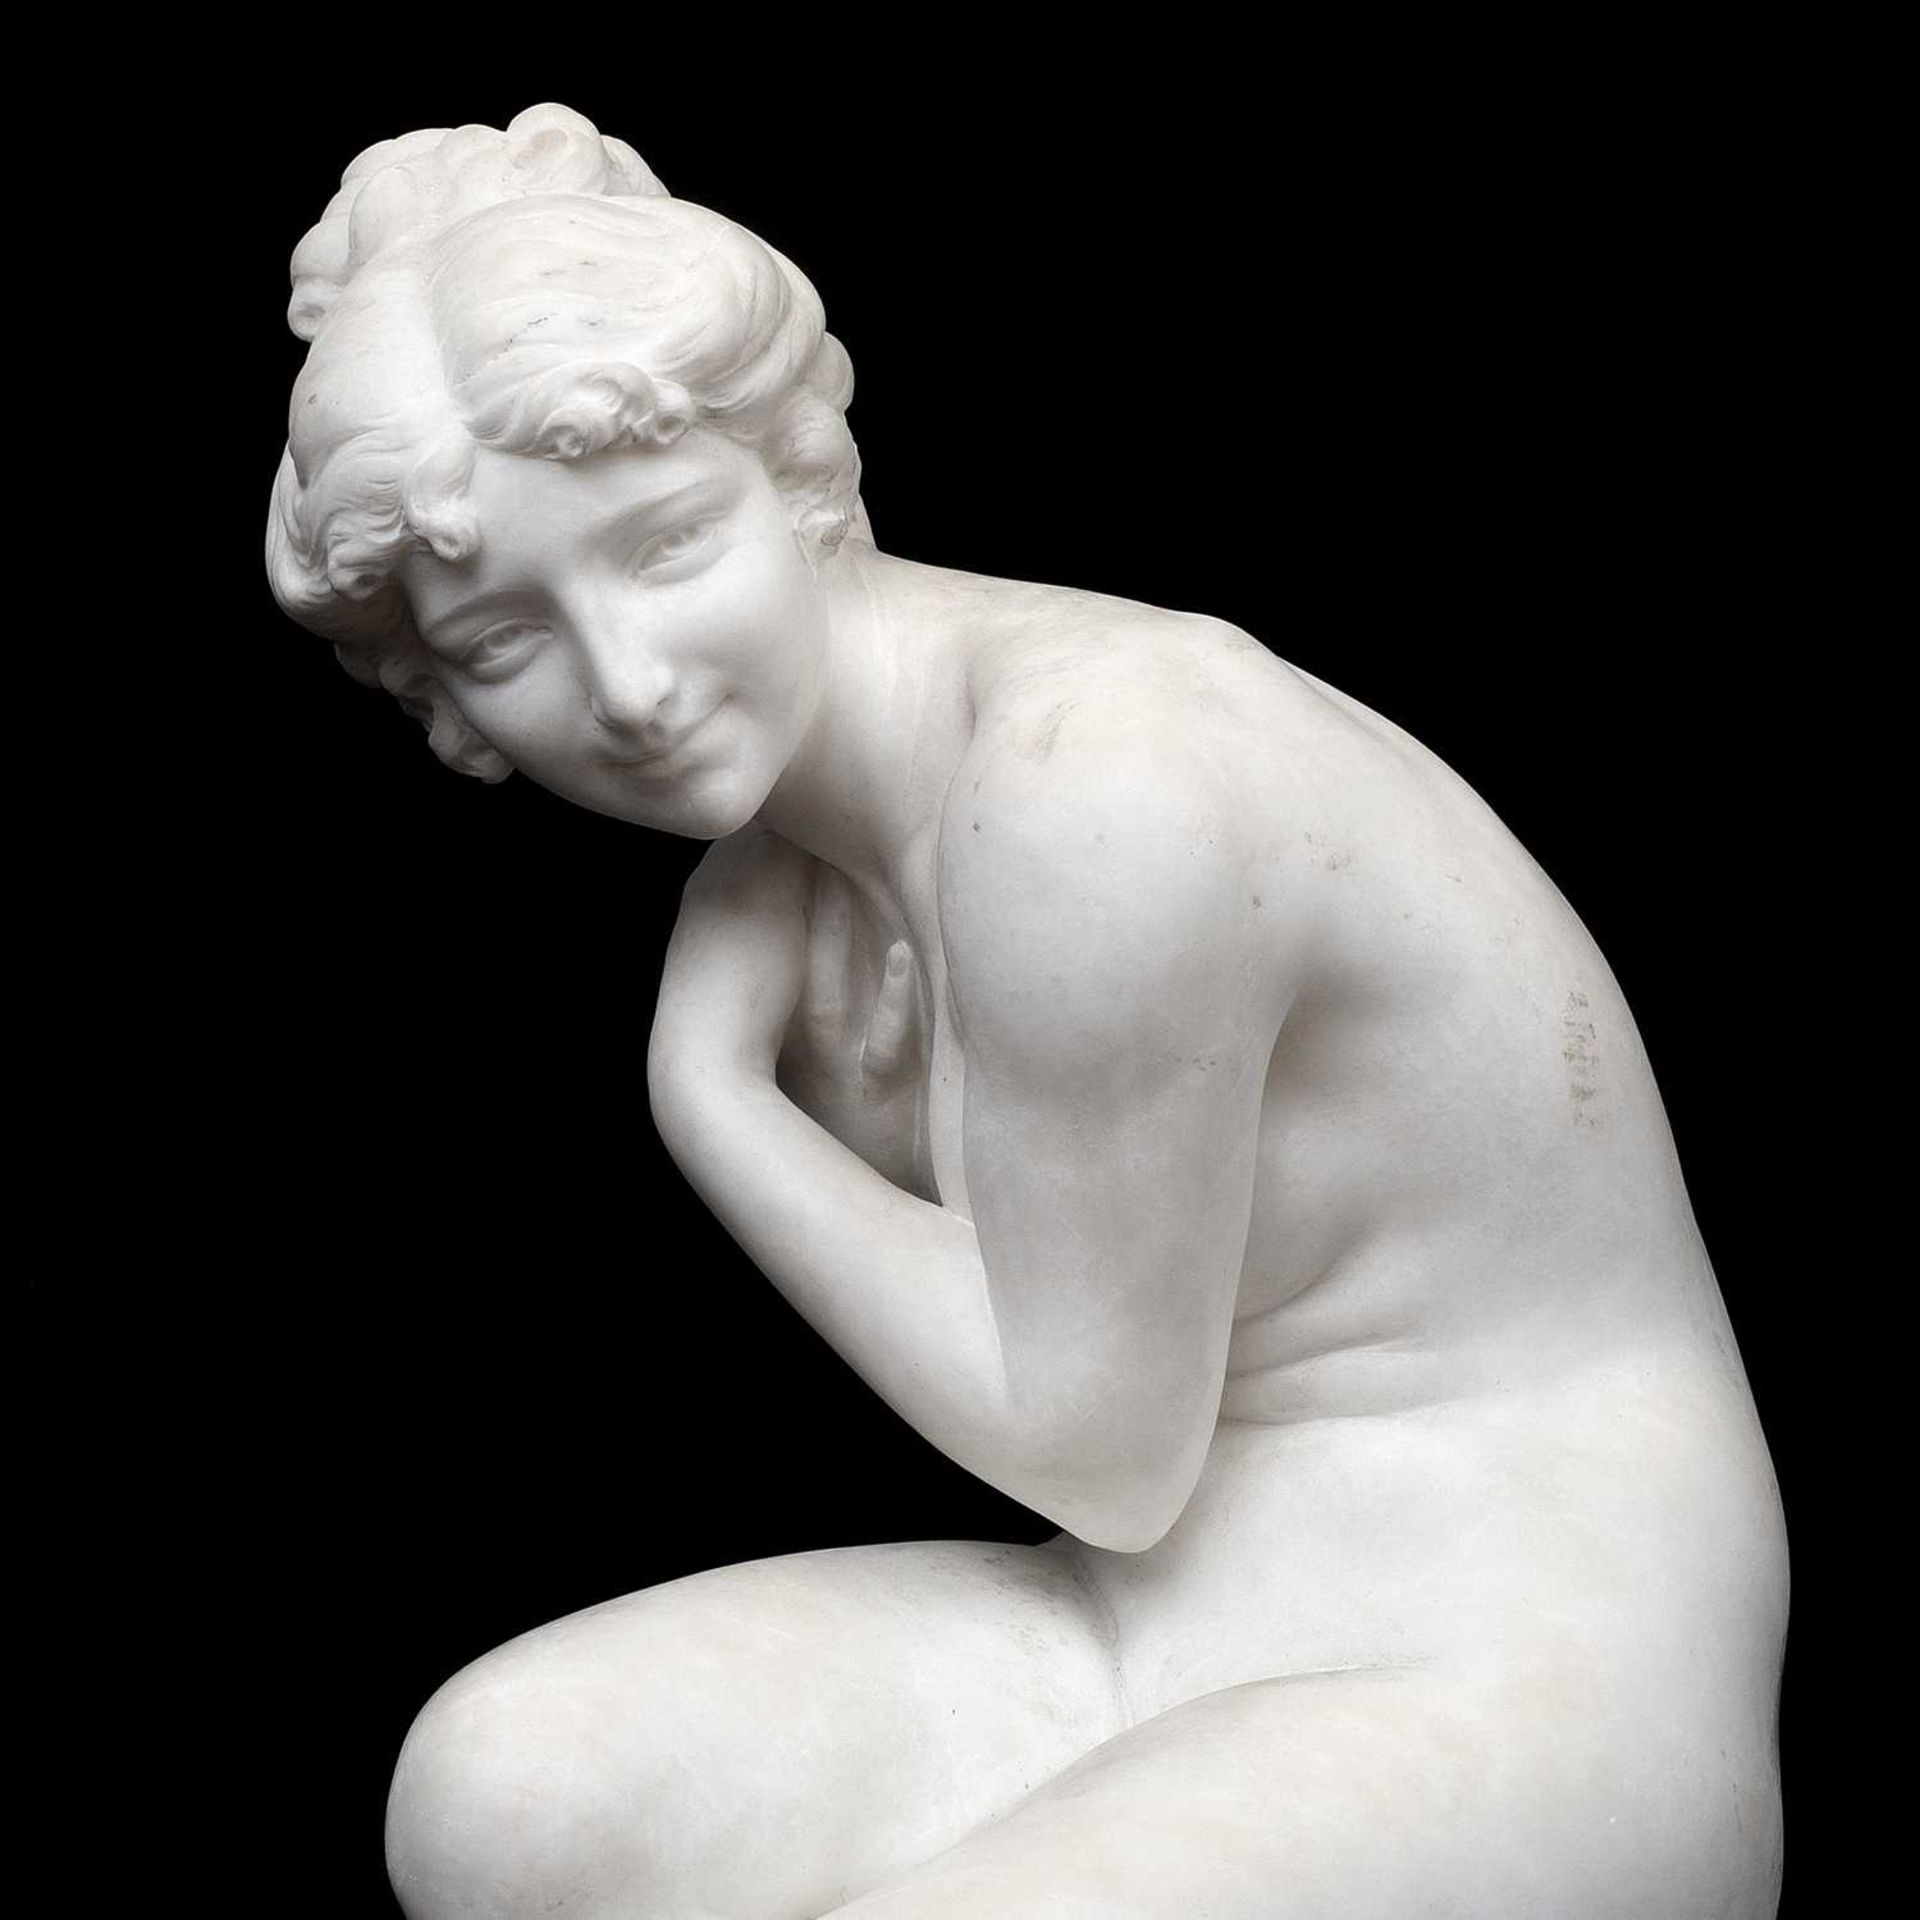 A LATE 19TH CENTURY ITALIAN ALABASTER FIGURE OF A NUDE GIRL ON A STOOL - Image 2 of 4